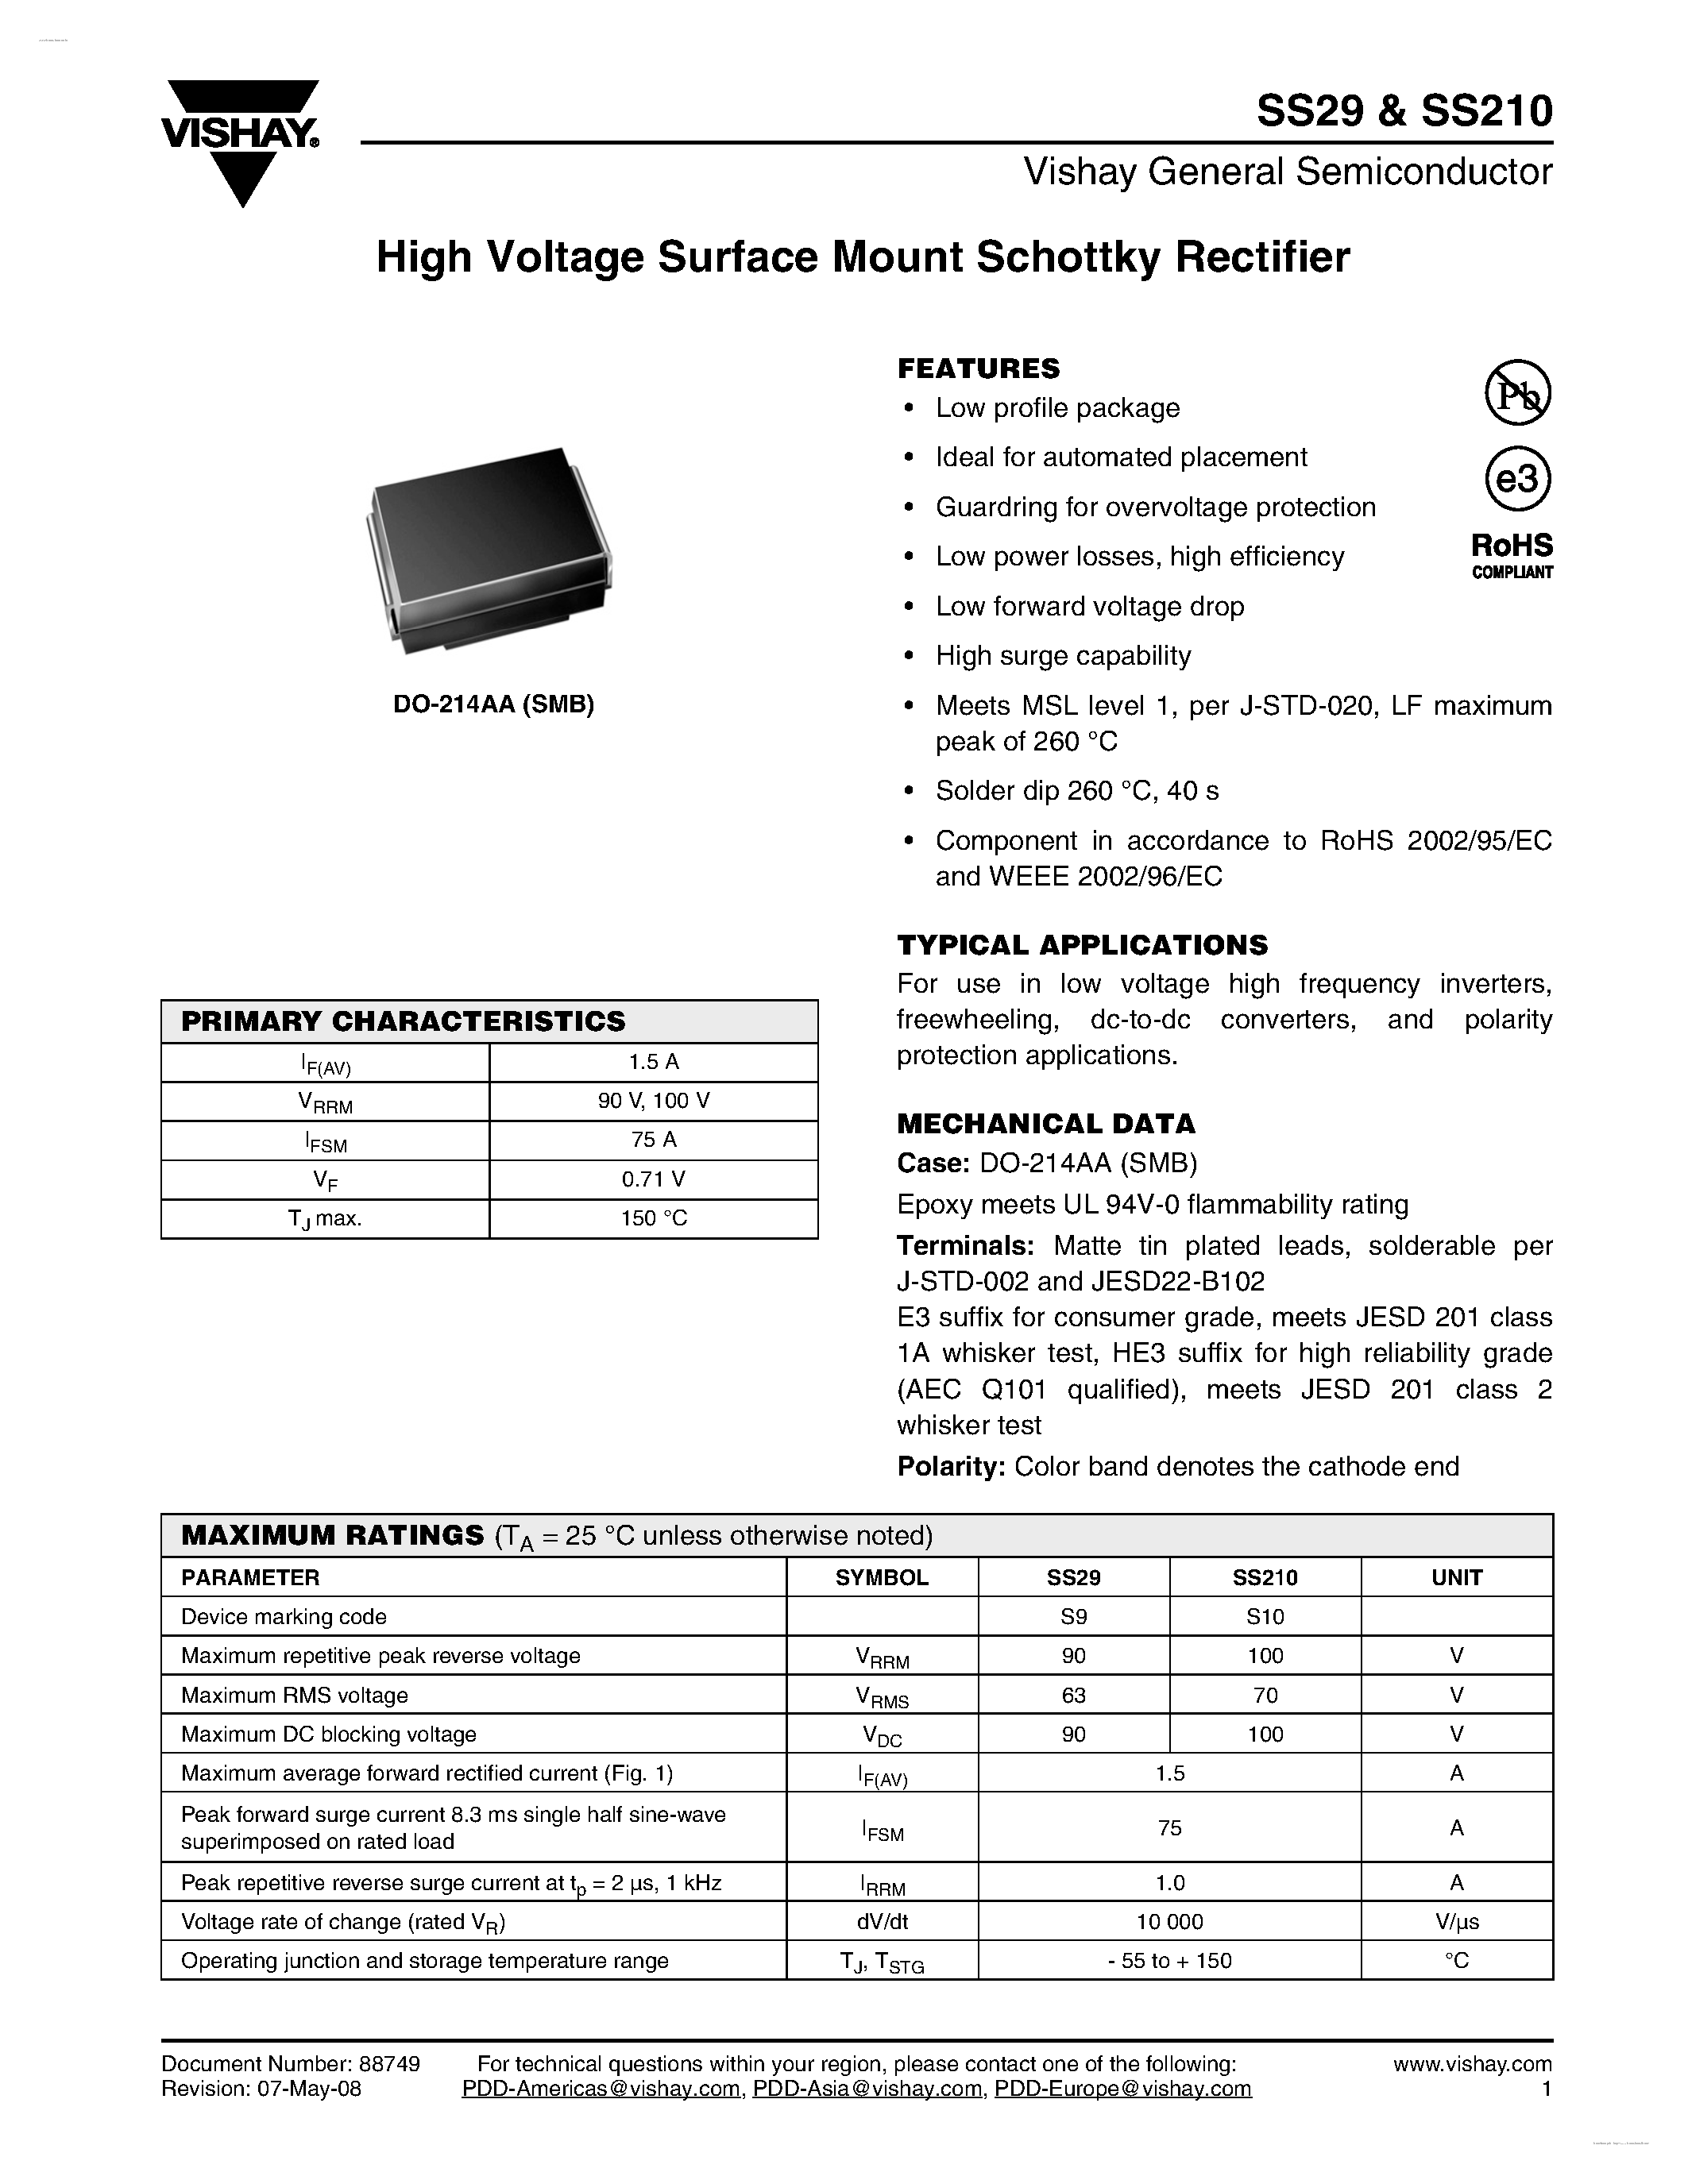 Datasheet SS210 - (SS29 / SS210) High Voltage Surface Mount Schottky Rectifier page 1